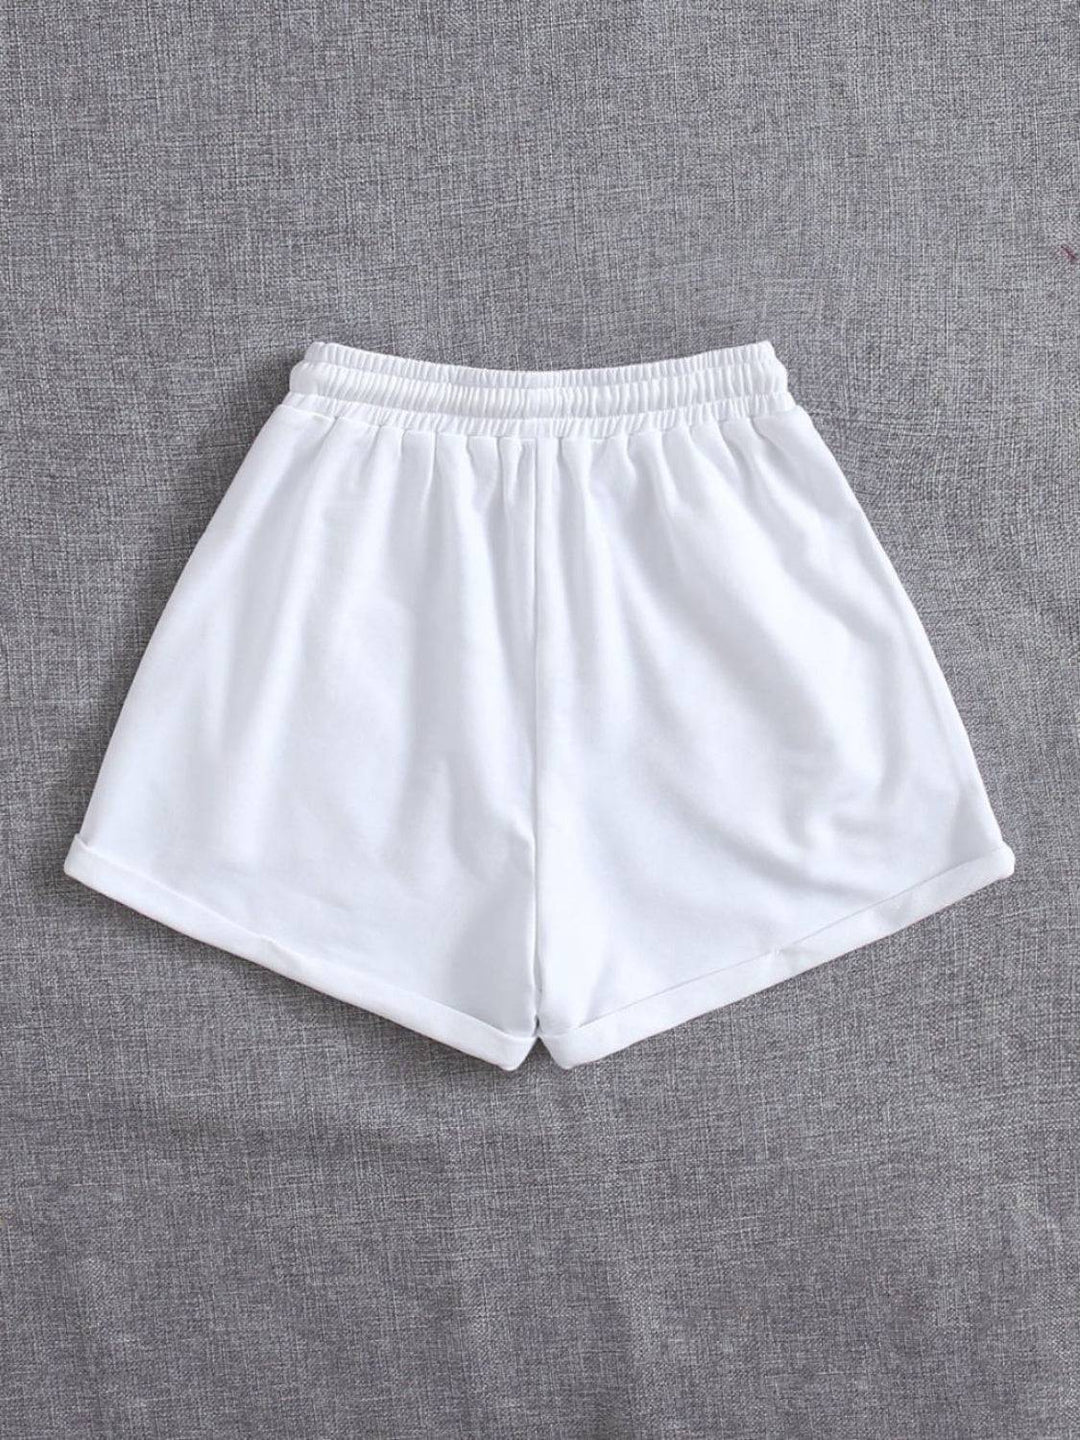 a pair of white shorts sitting on top of a bed